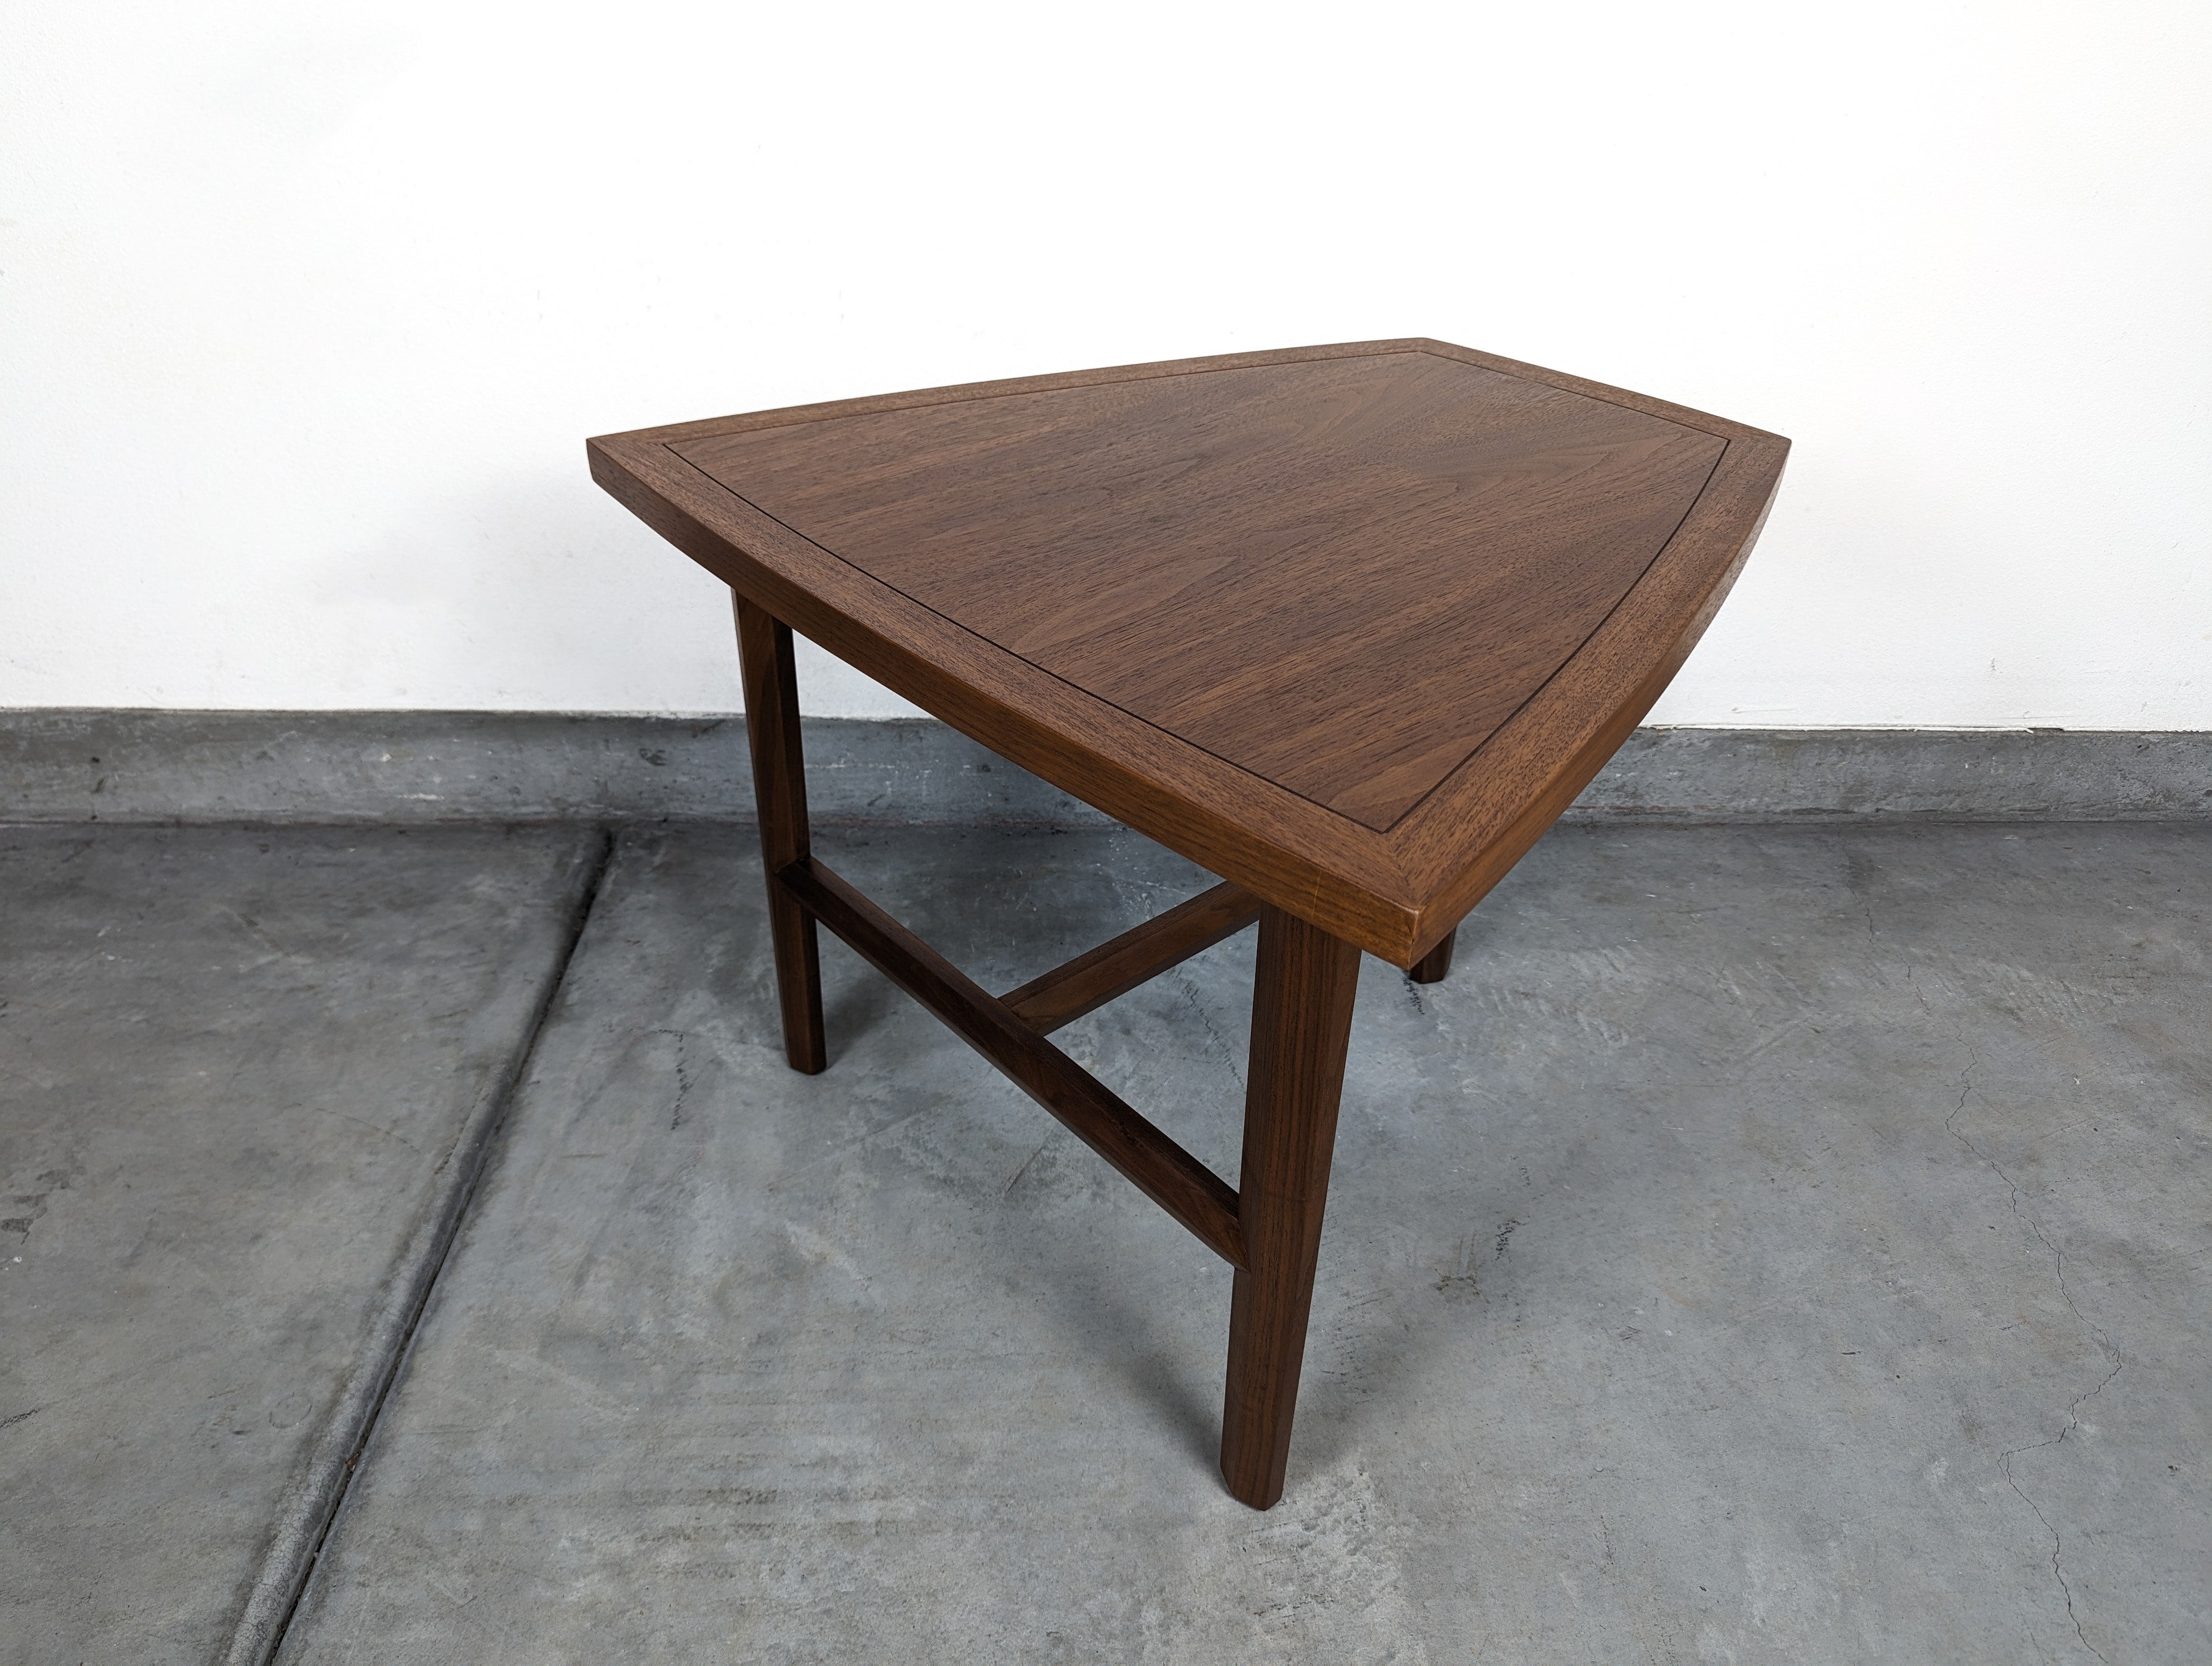 Step into the realm of mid-century modern design with this exquisitely crafted walnut side table, a testament to the ingenuity of renowned master woodworker George Nakashima. A part of the Widdicomb collection dating back to the 1960s, this table